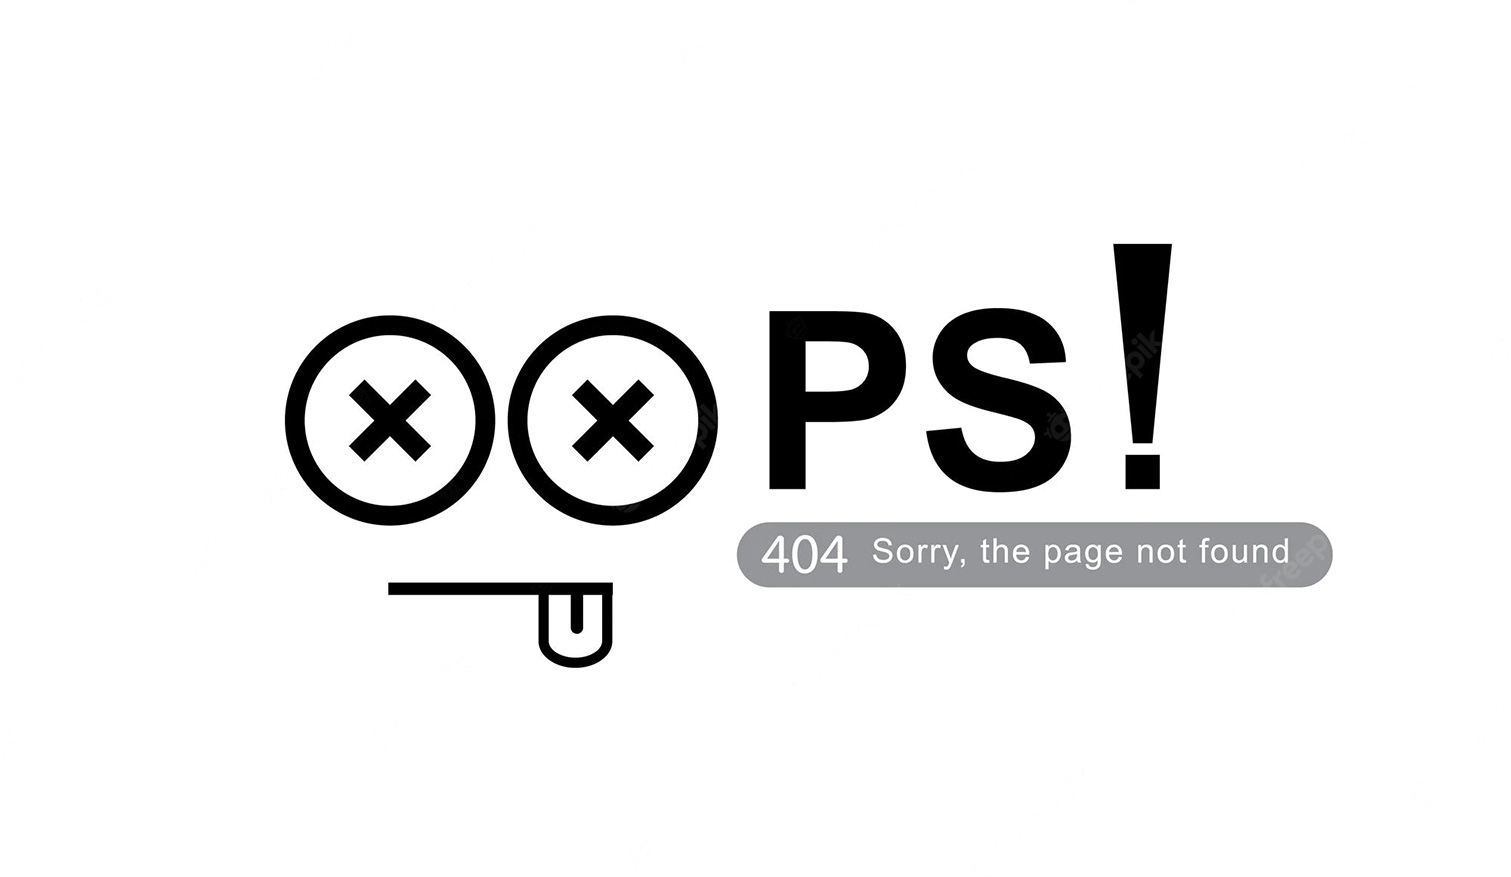 404 is not found